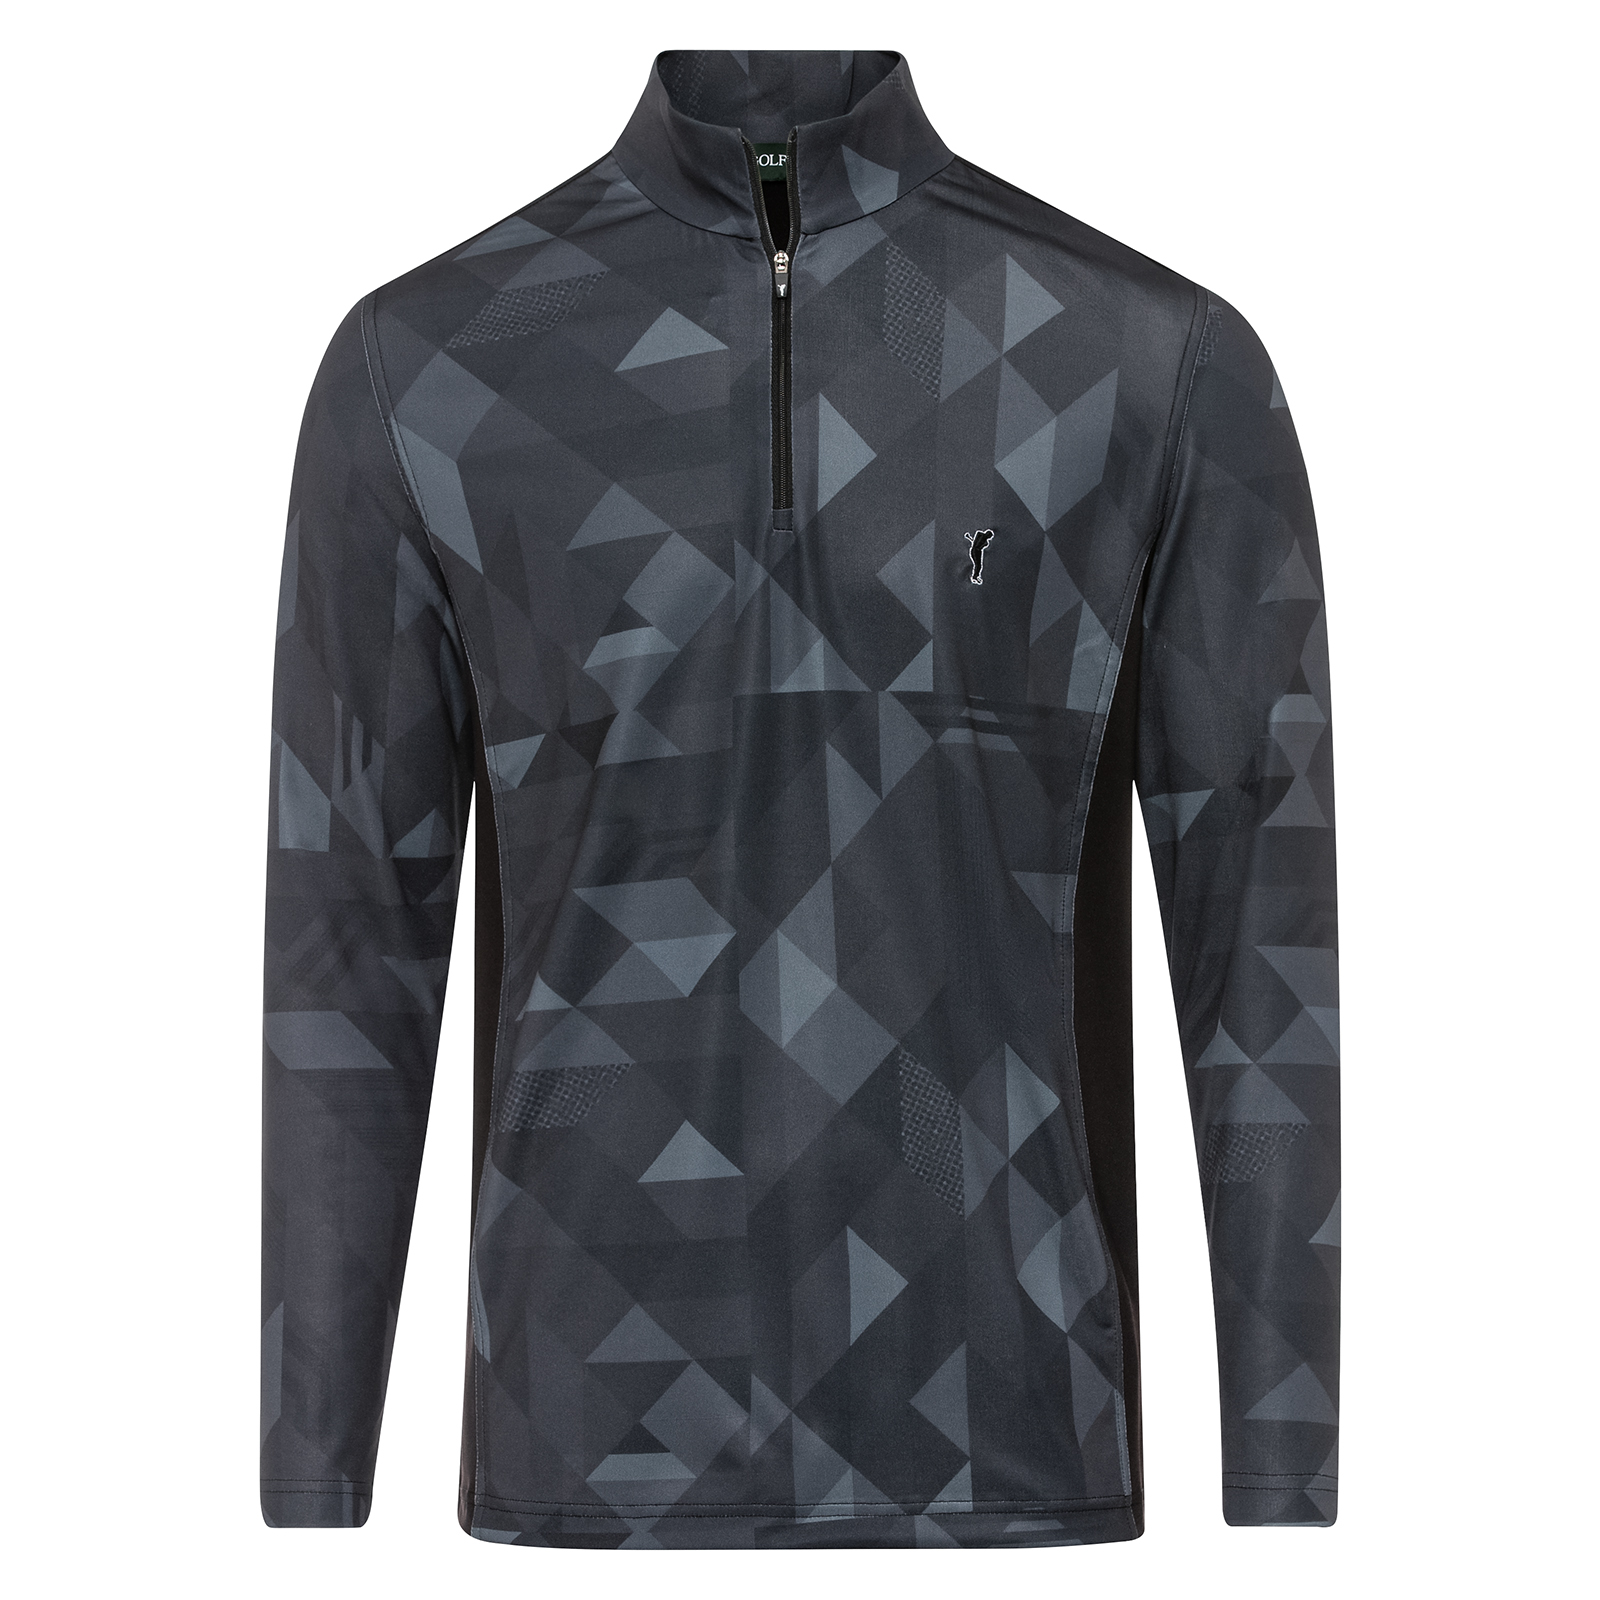 Men's long-sleeved golf shirt with all-over graphic print